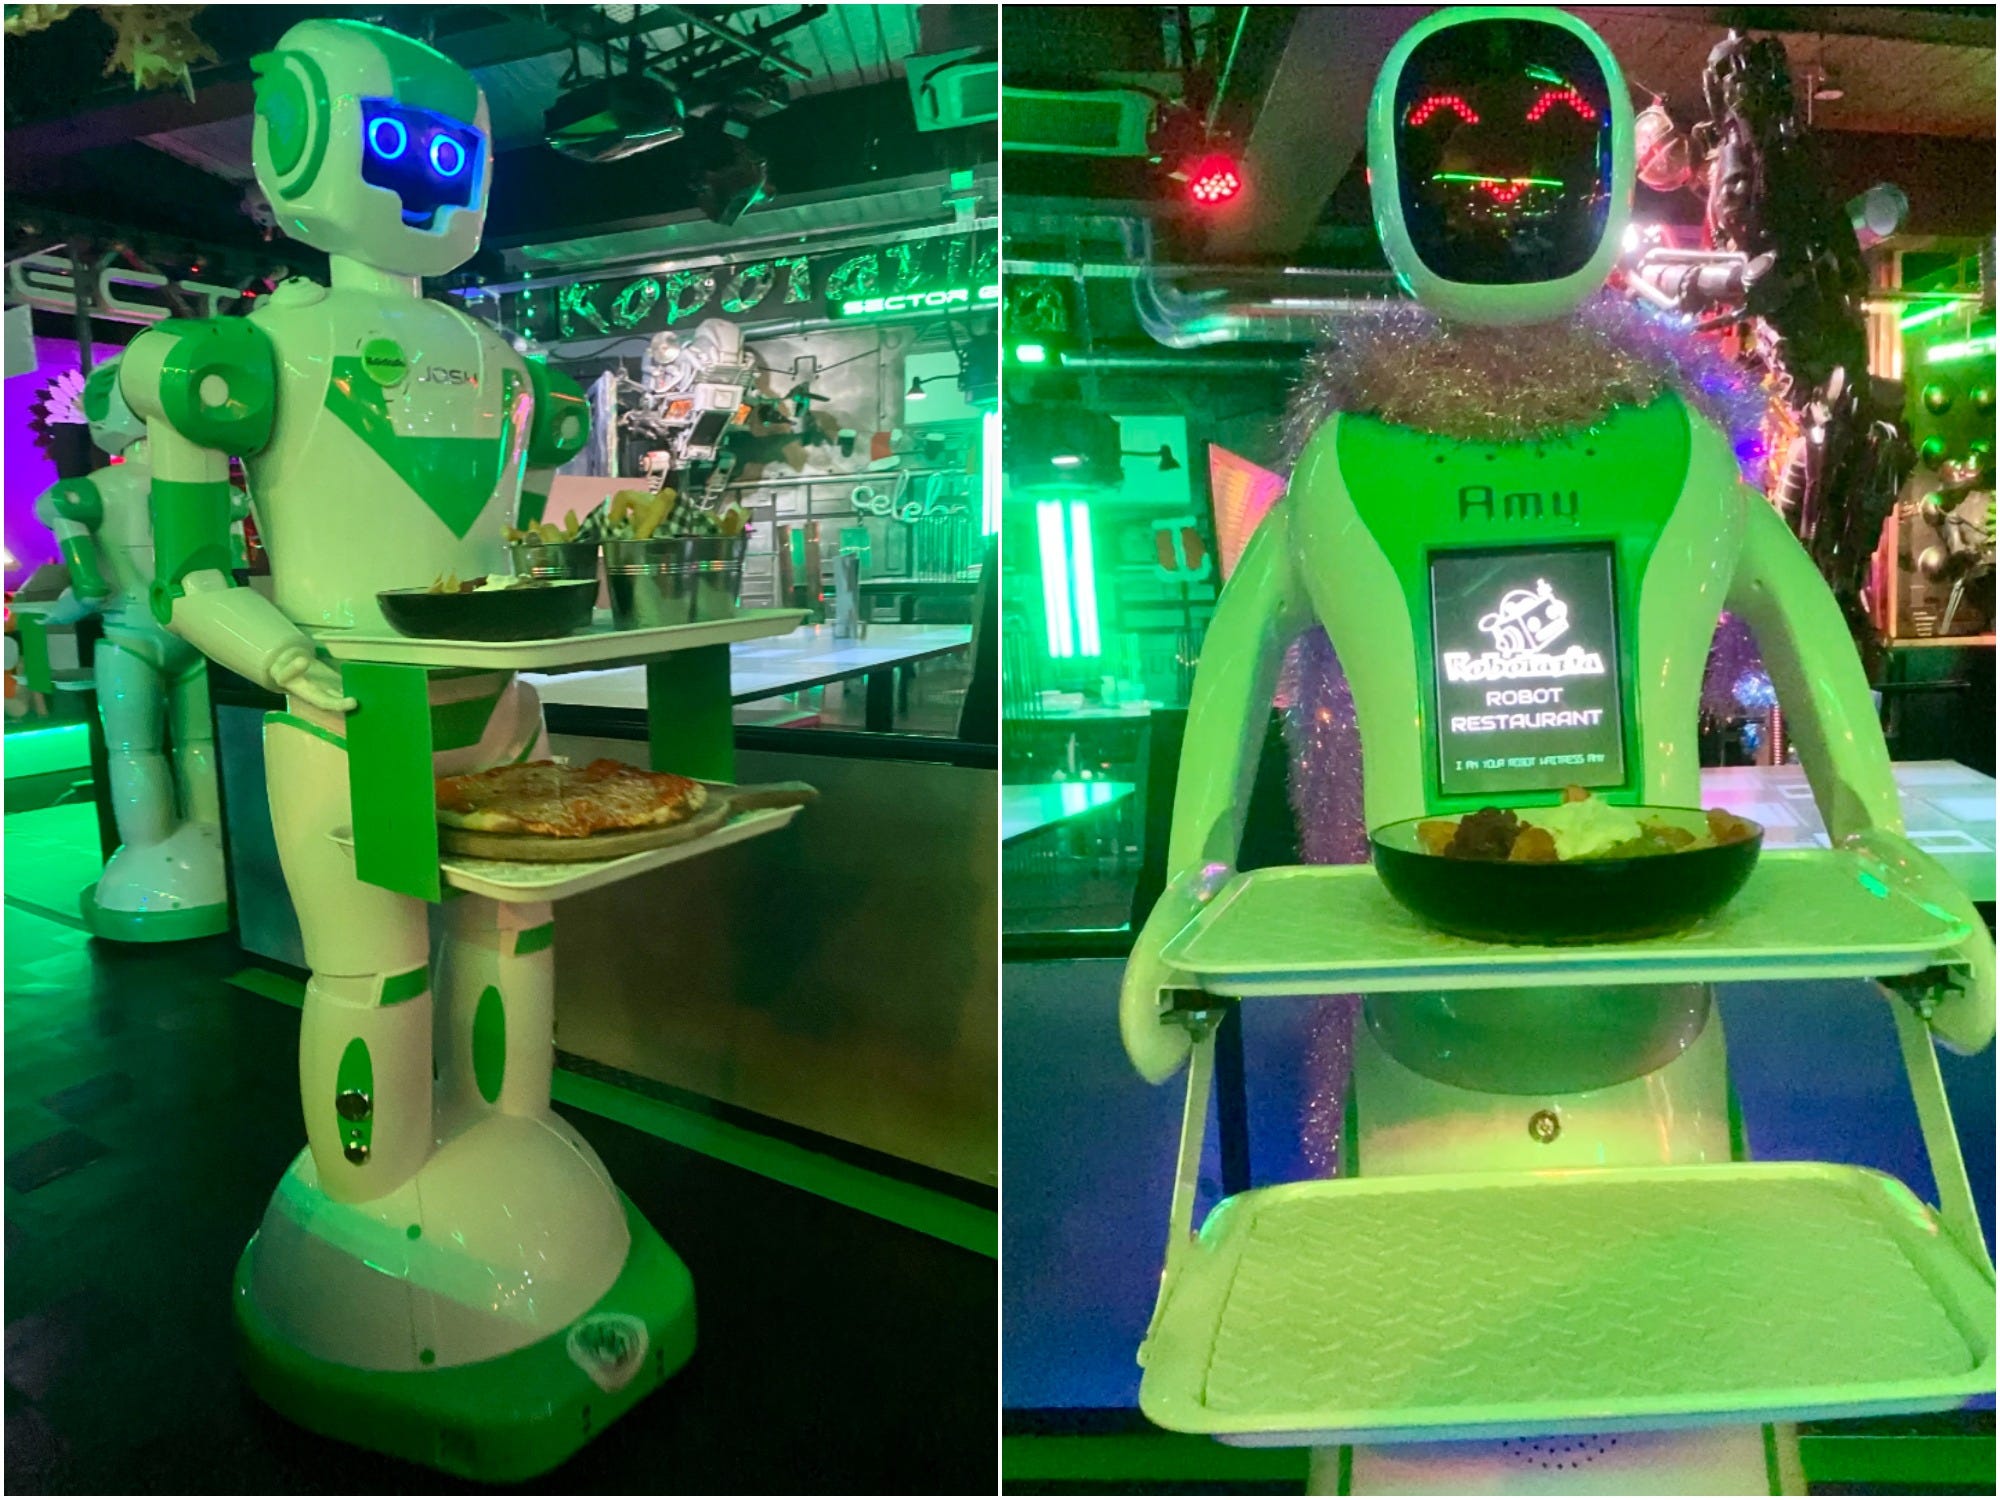 Amy and Josh are robot servers in Robotazia, a robotics restaurant in the UK.